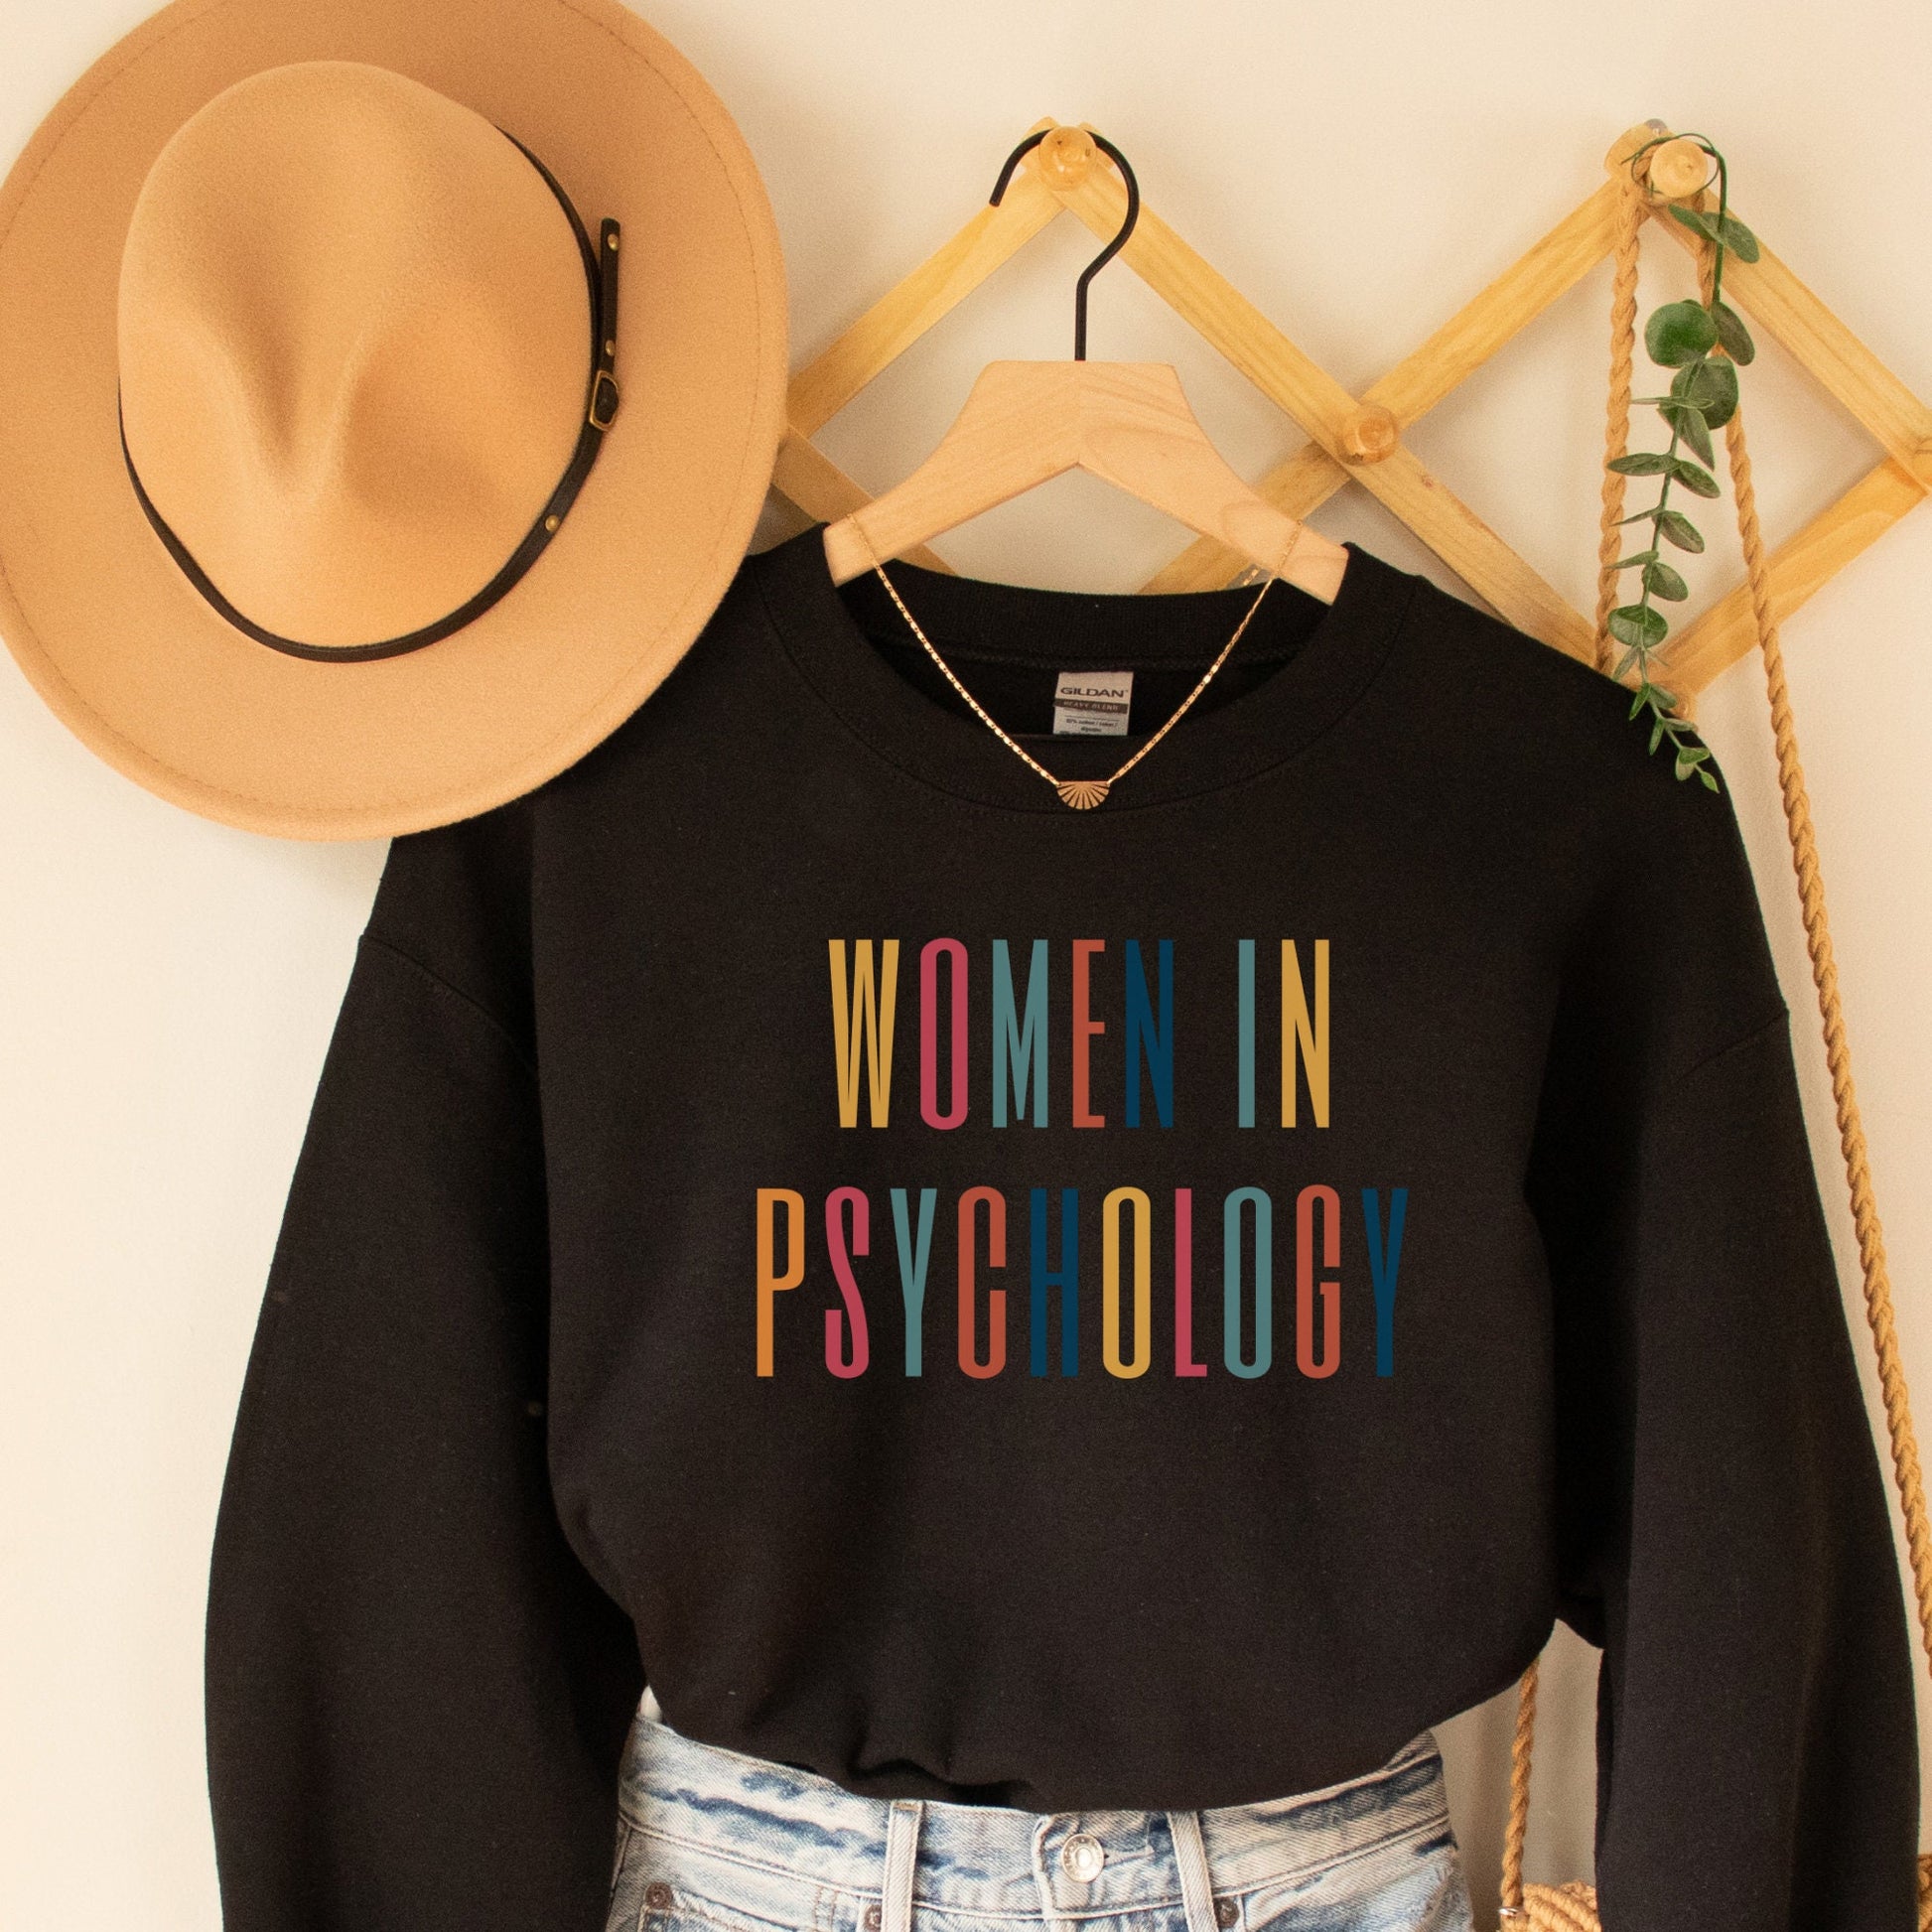 black unisex psych sweatshirt that says "women in psychology" in all capital, multicolored letters